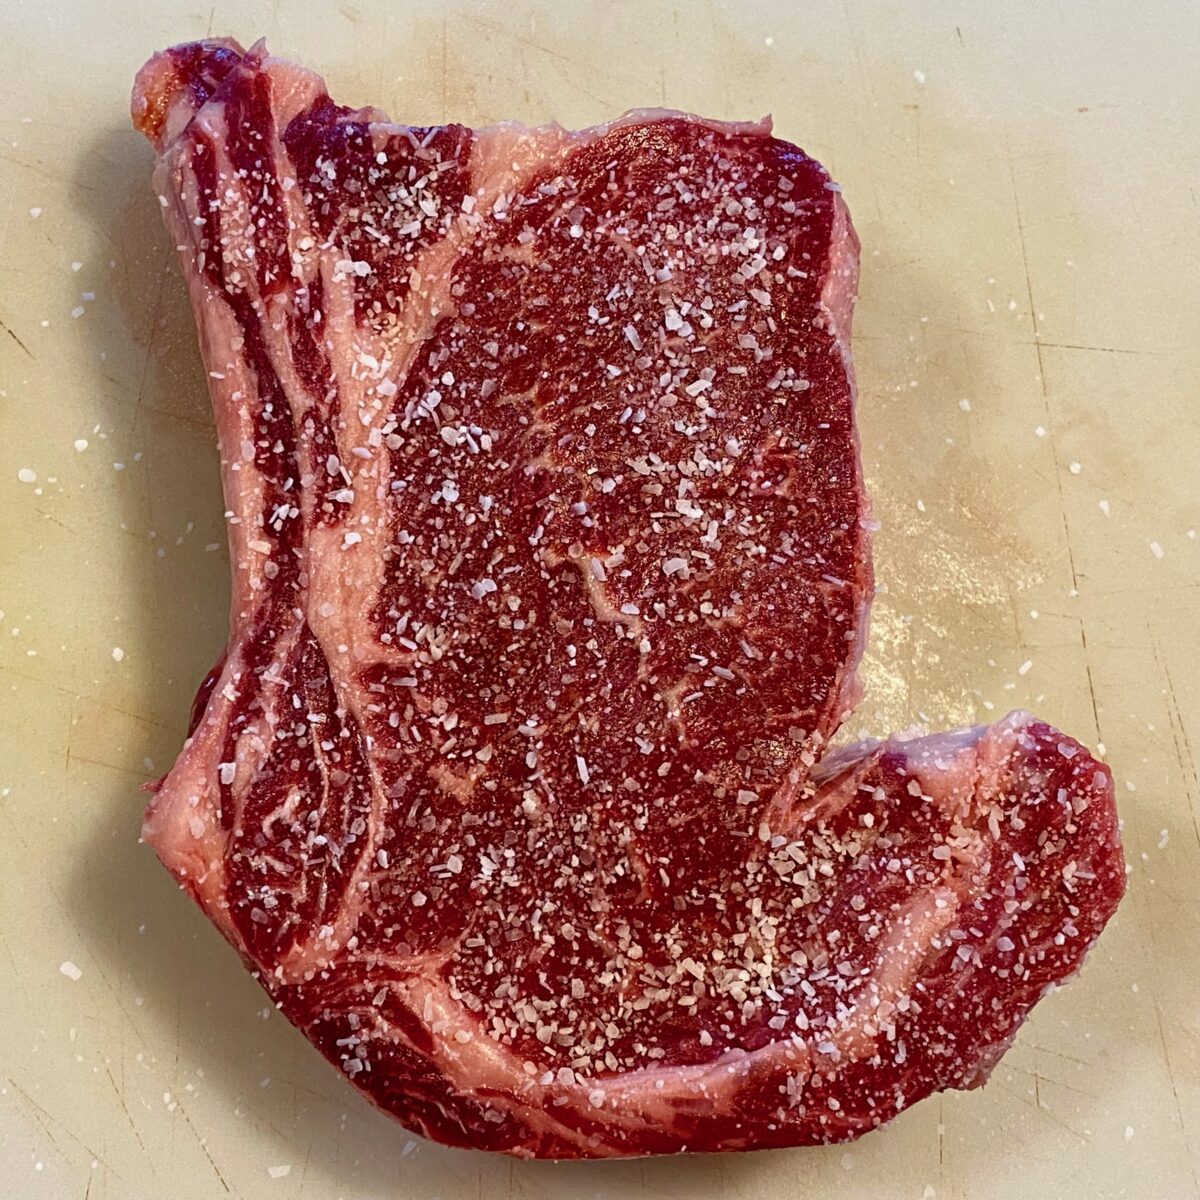 Top view of a ribeye that has been heavily salted.